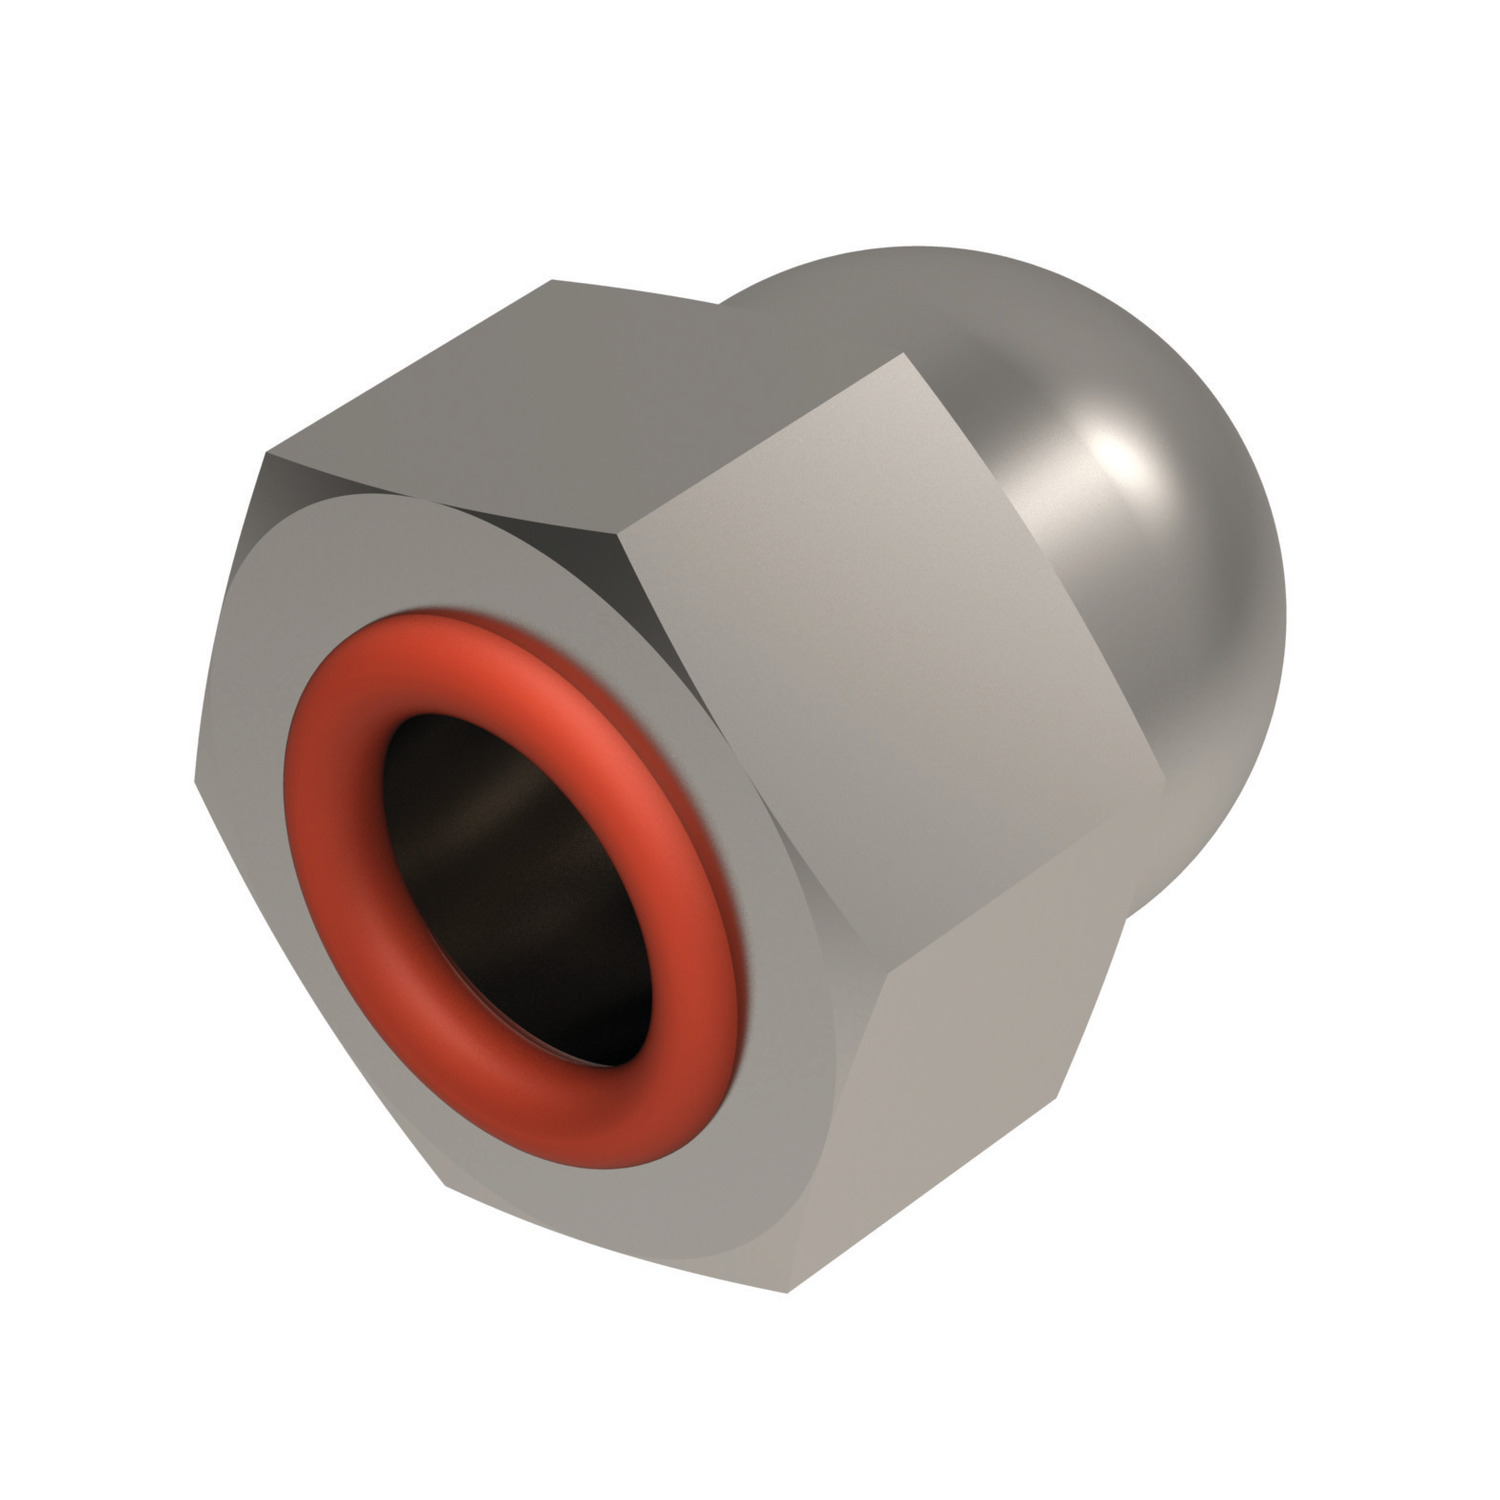 P0179 Integral Seal Domed Nuts